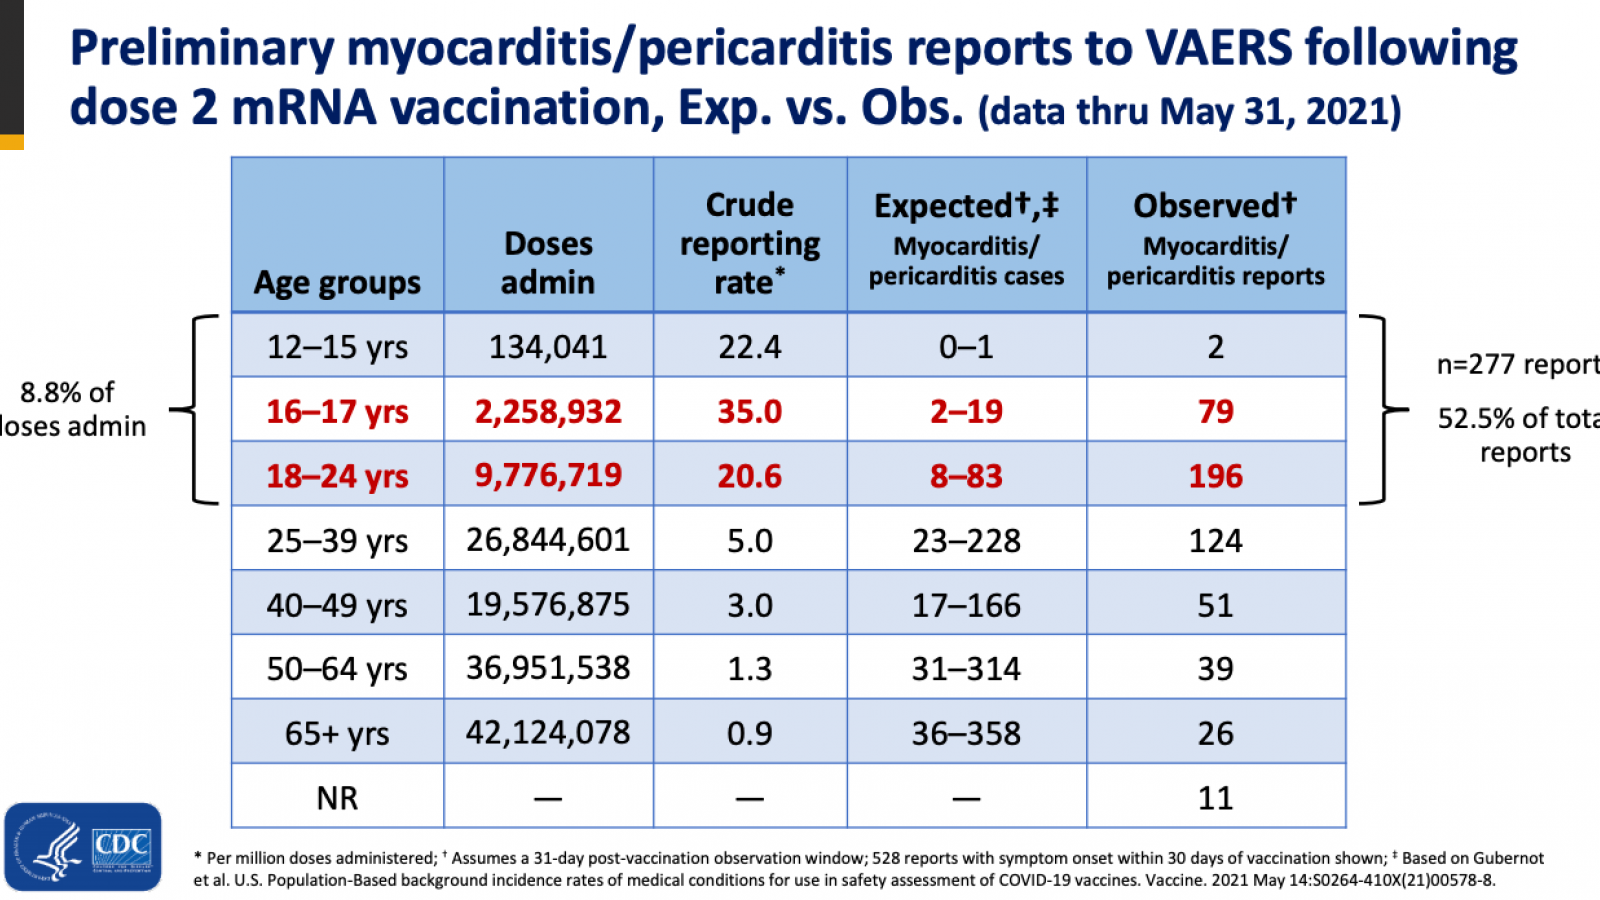 CDC presentation on reports of heart problems following vaccination for young people